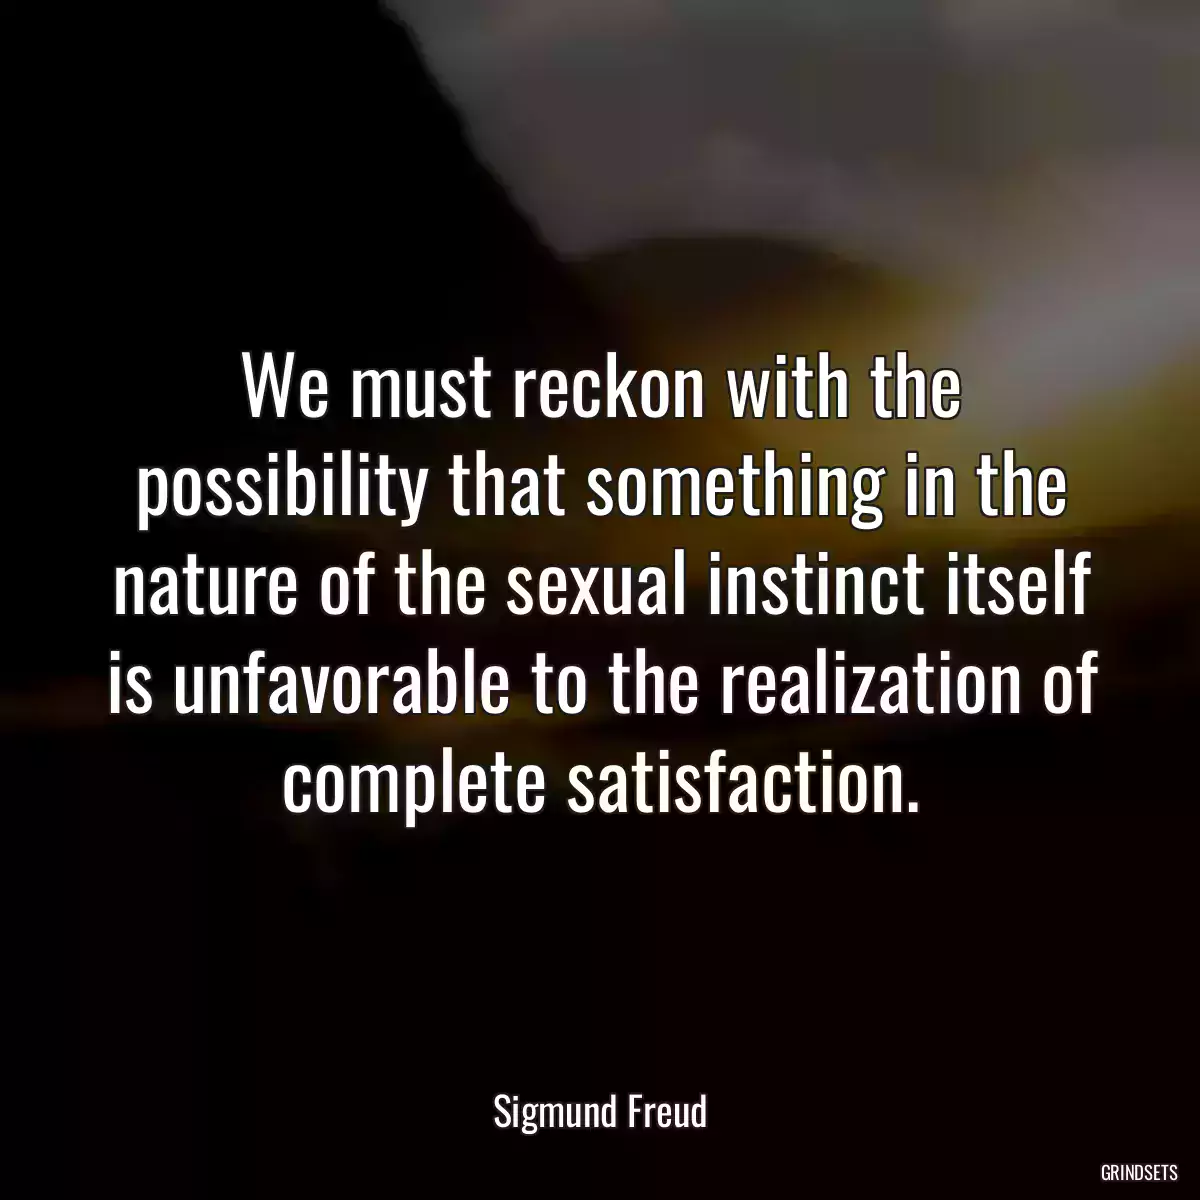 We must reckon with the possibility that something in the nature of the sexual instinct itself is unfavorable to the realization of complete satisfaction.